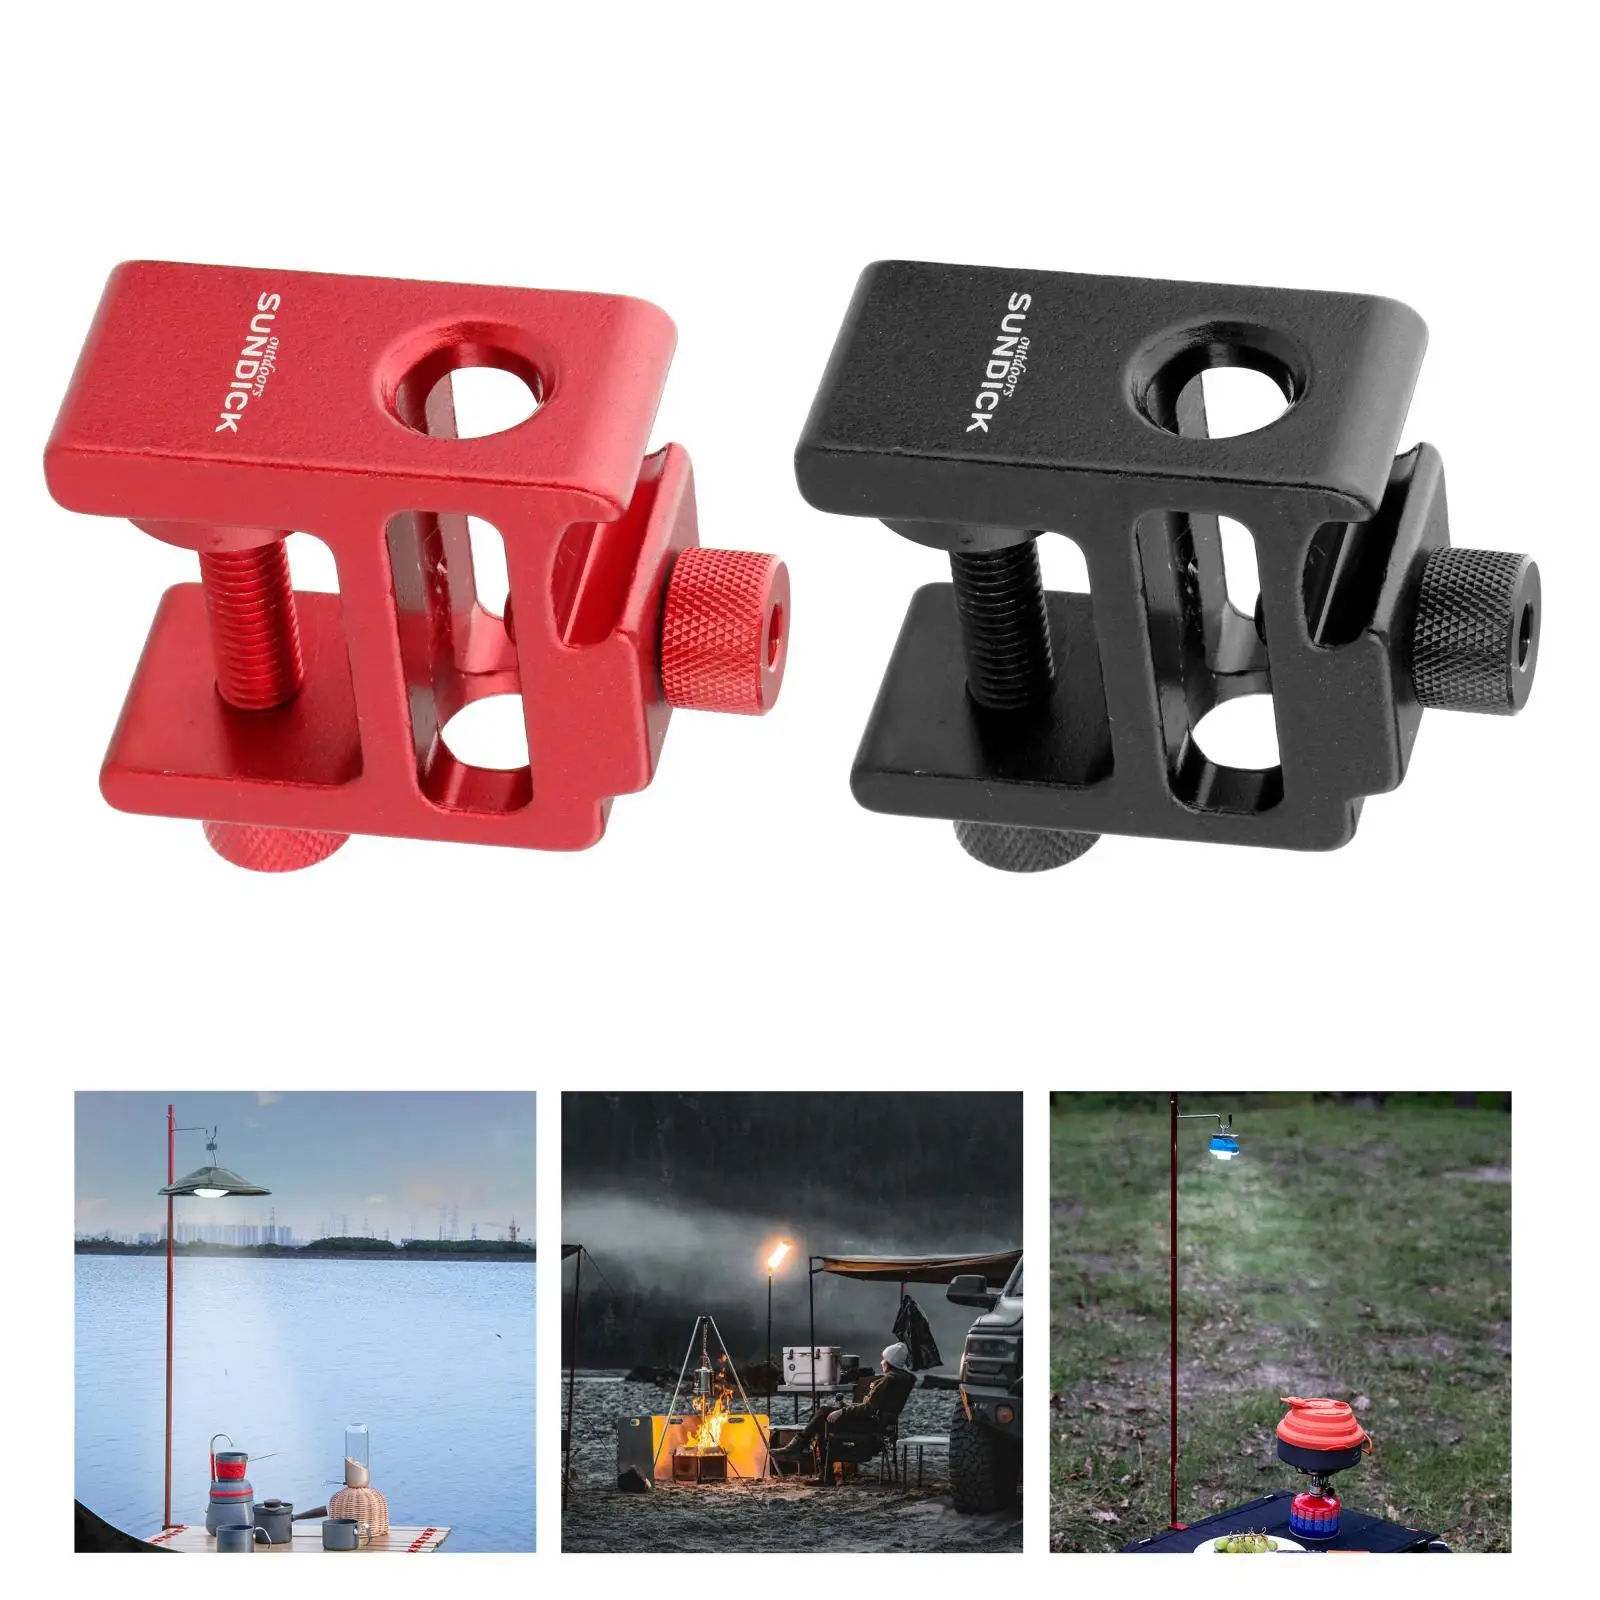  Light Stand  Clamp, Desk Mount  Outdoor Indoor, Universal Fixing Clamp Light Stand ,for Lantern,  ,